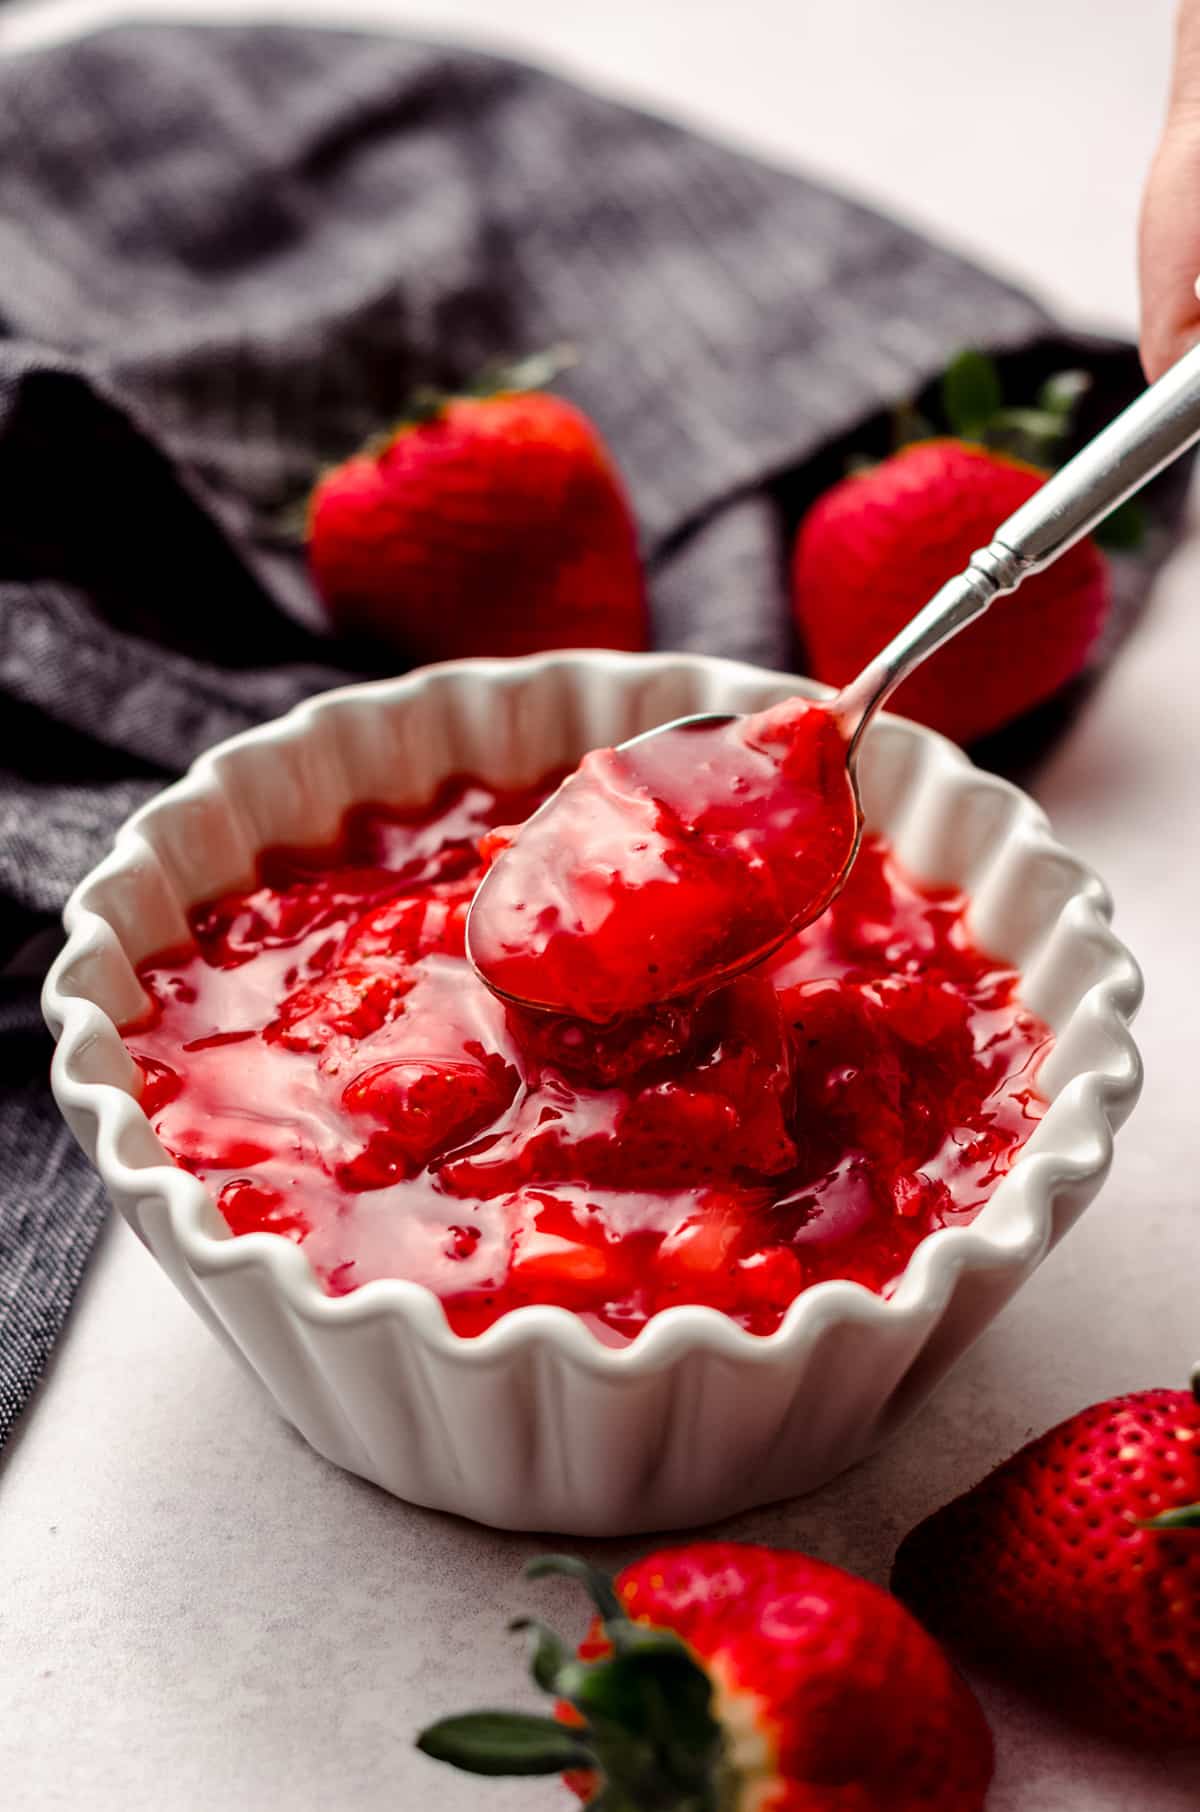 spoon lifting a scoop of easy strawberry compote out of a bowl